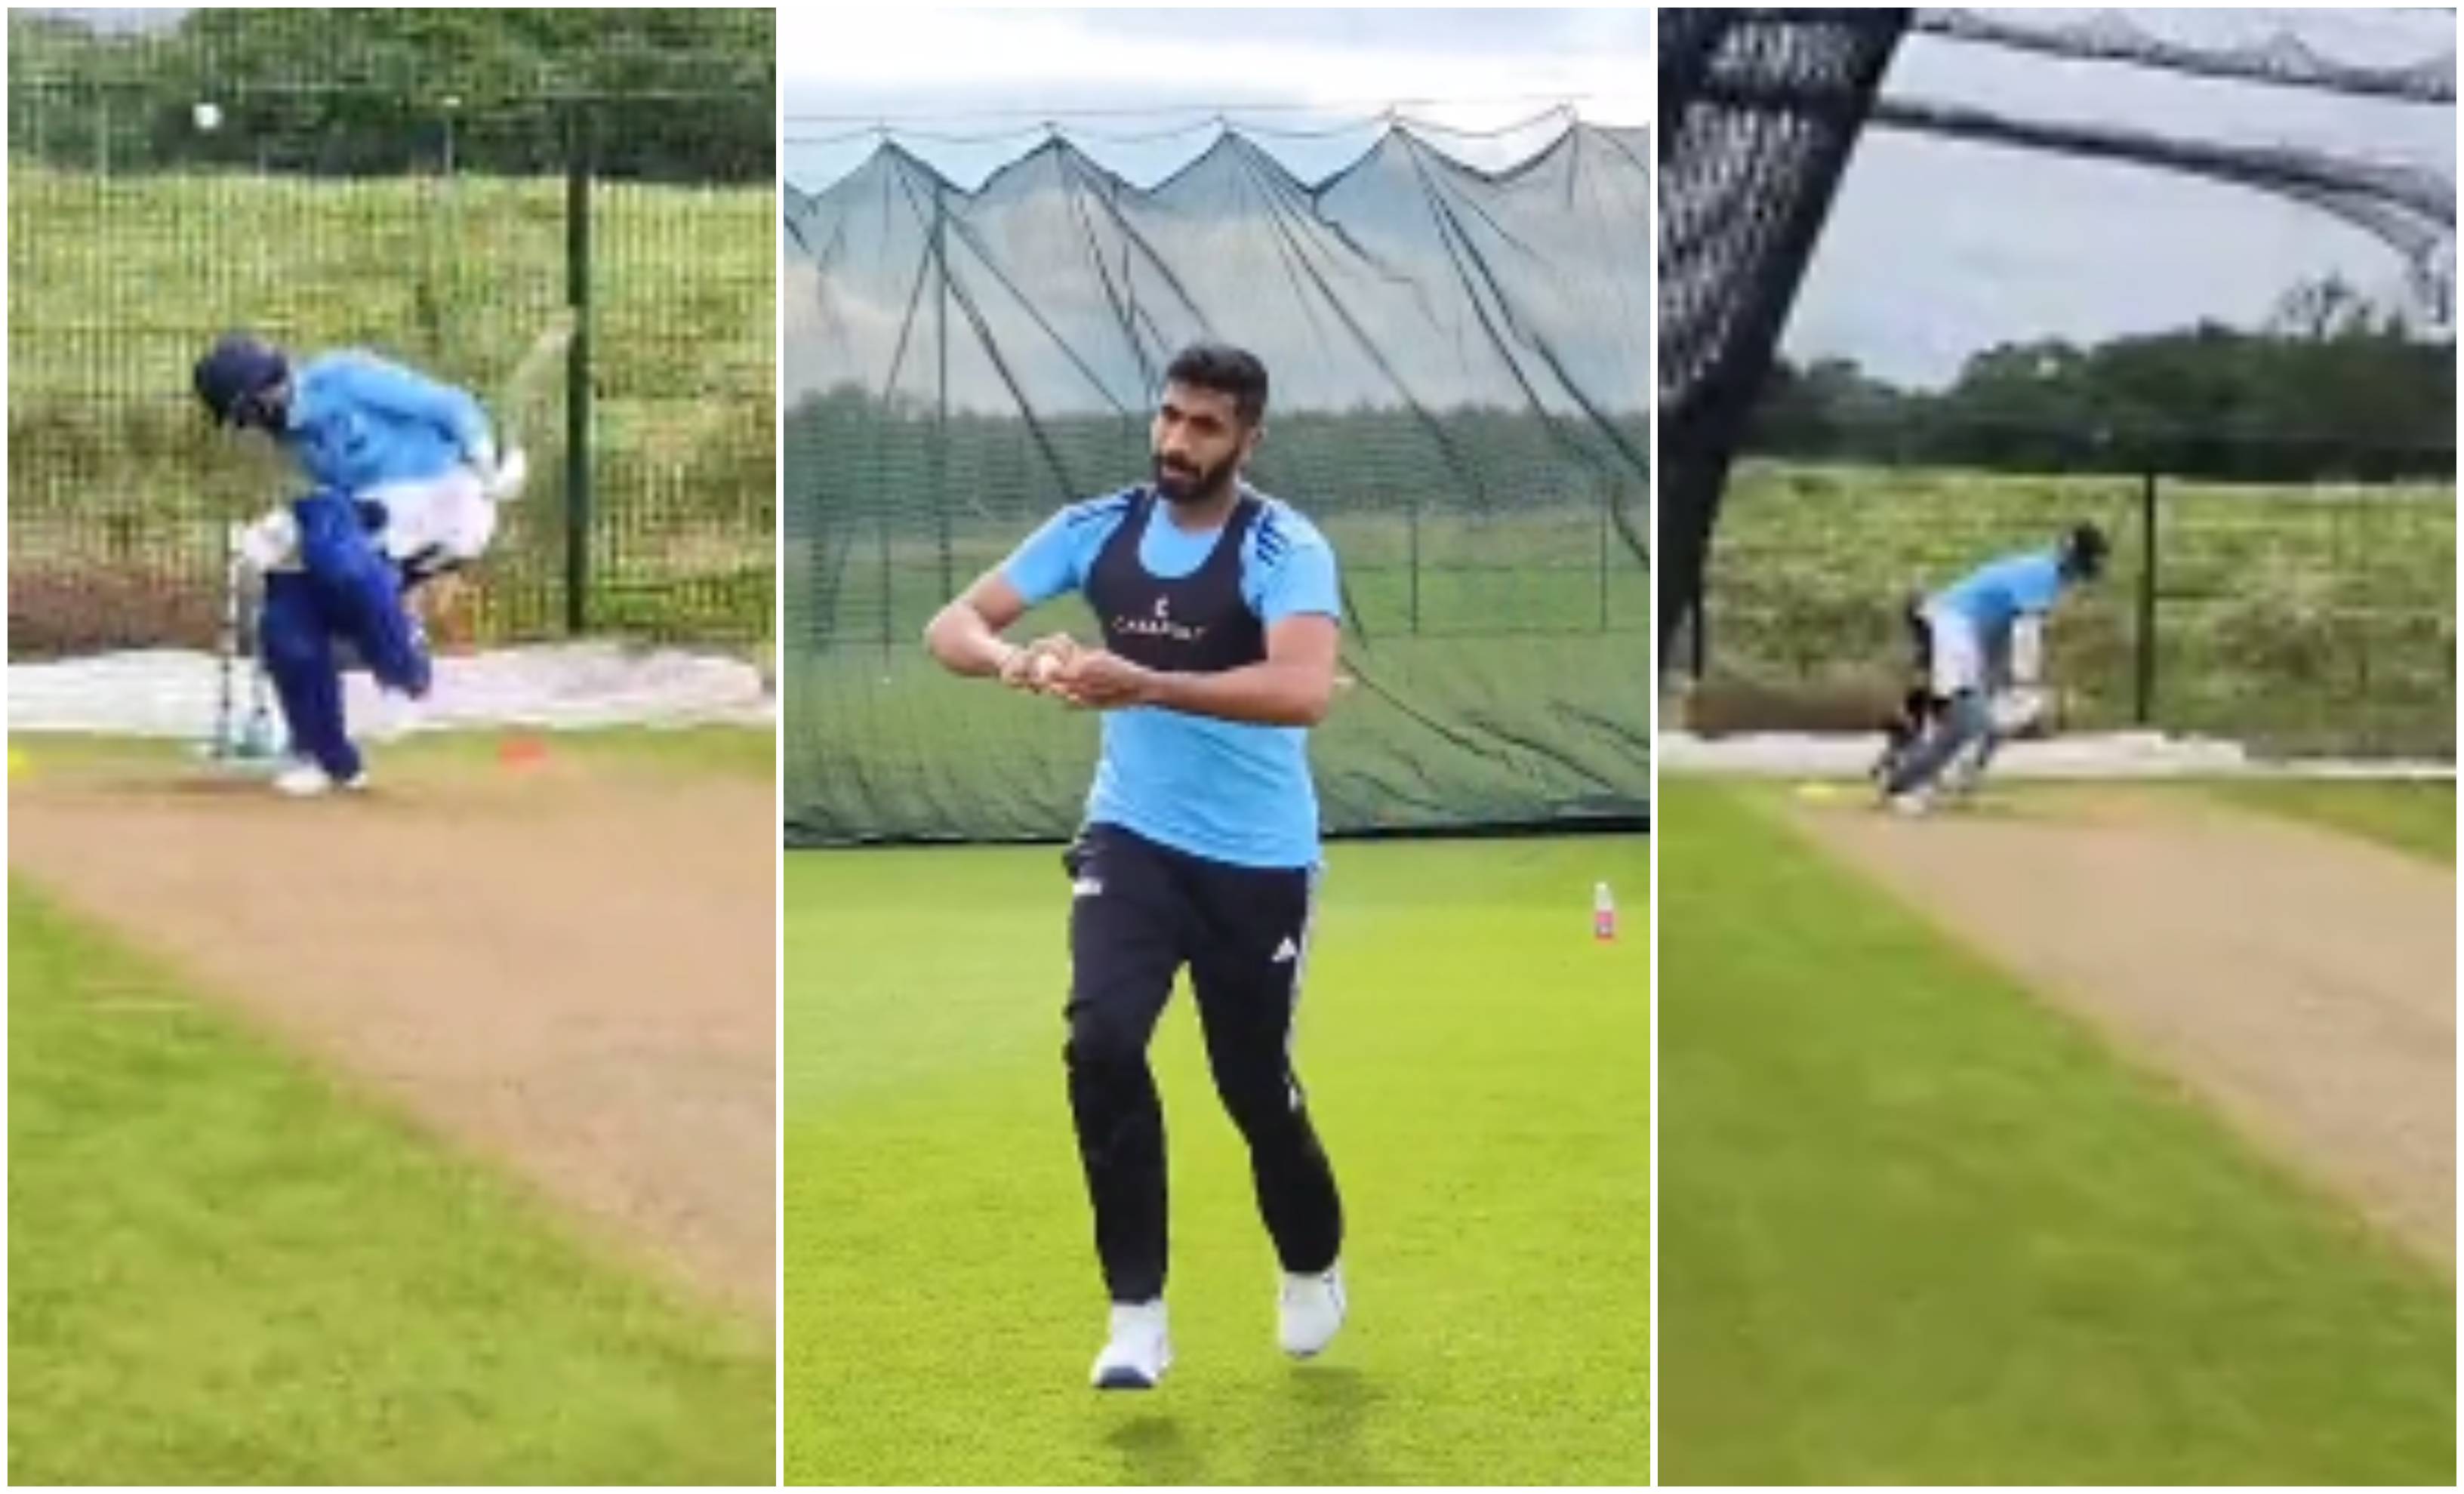 Jasprit Bumrah was at his very best in the nets | BCCI